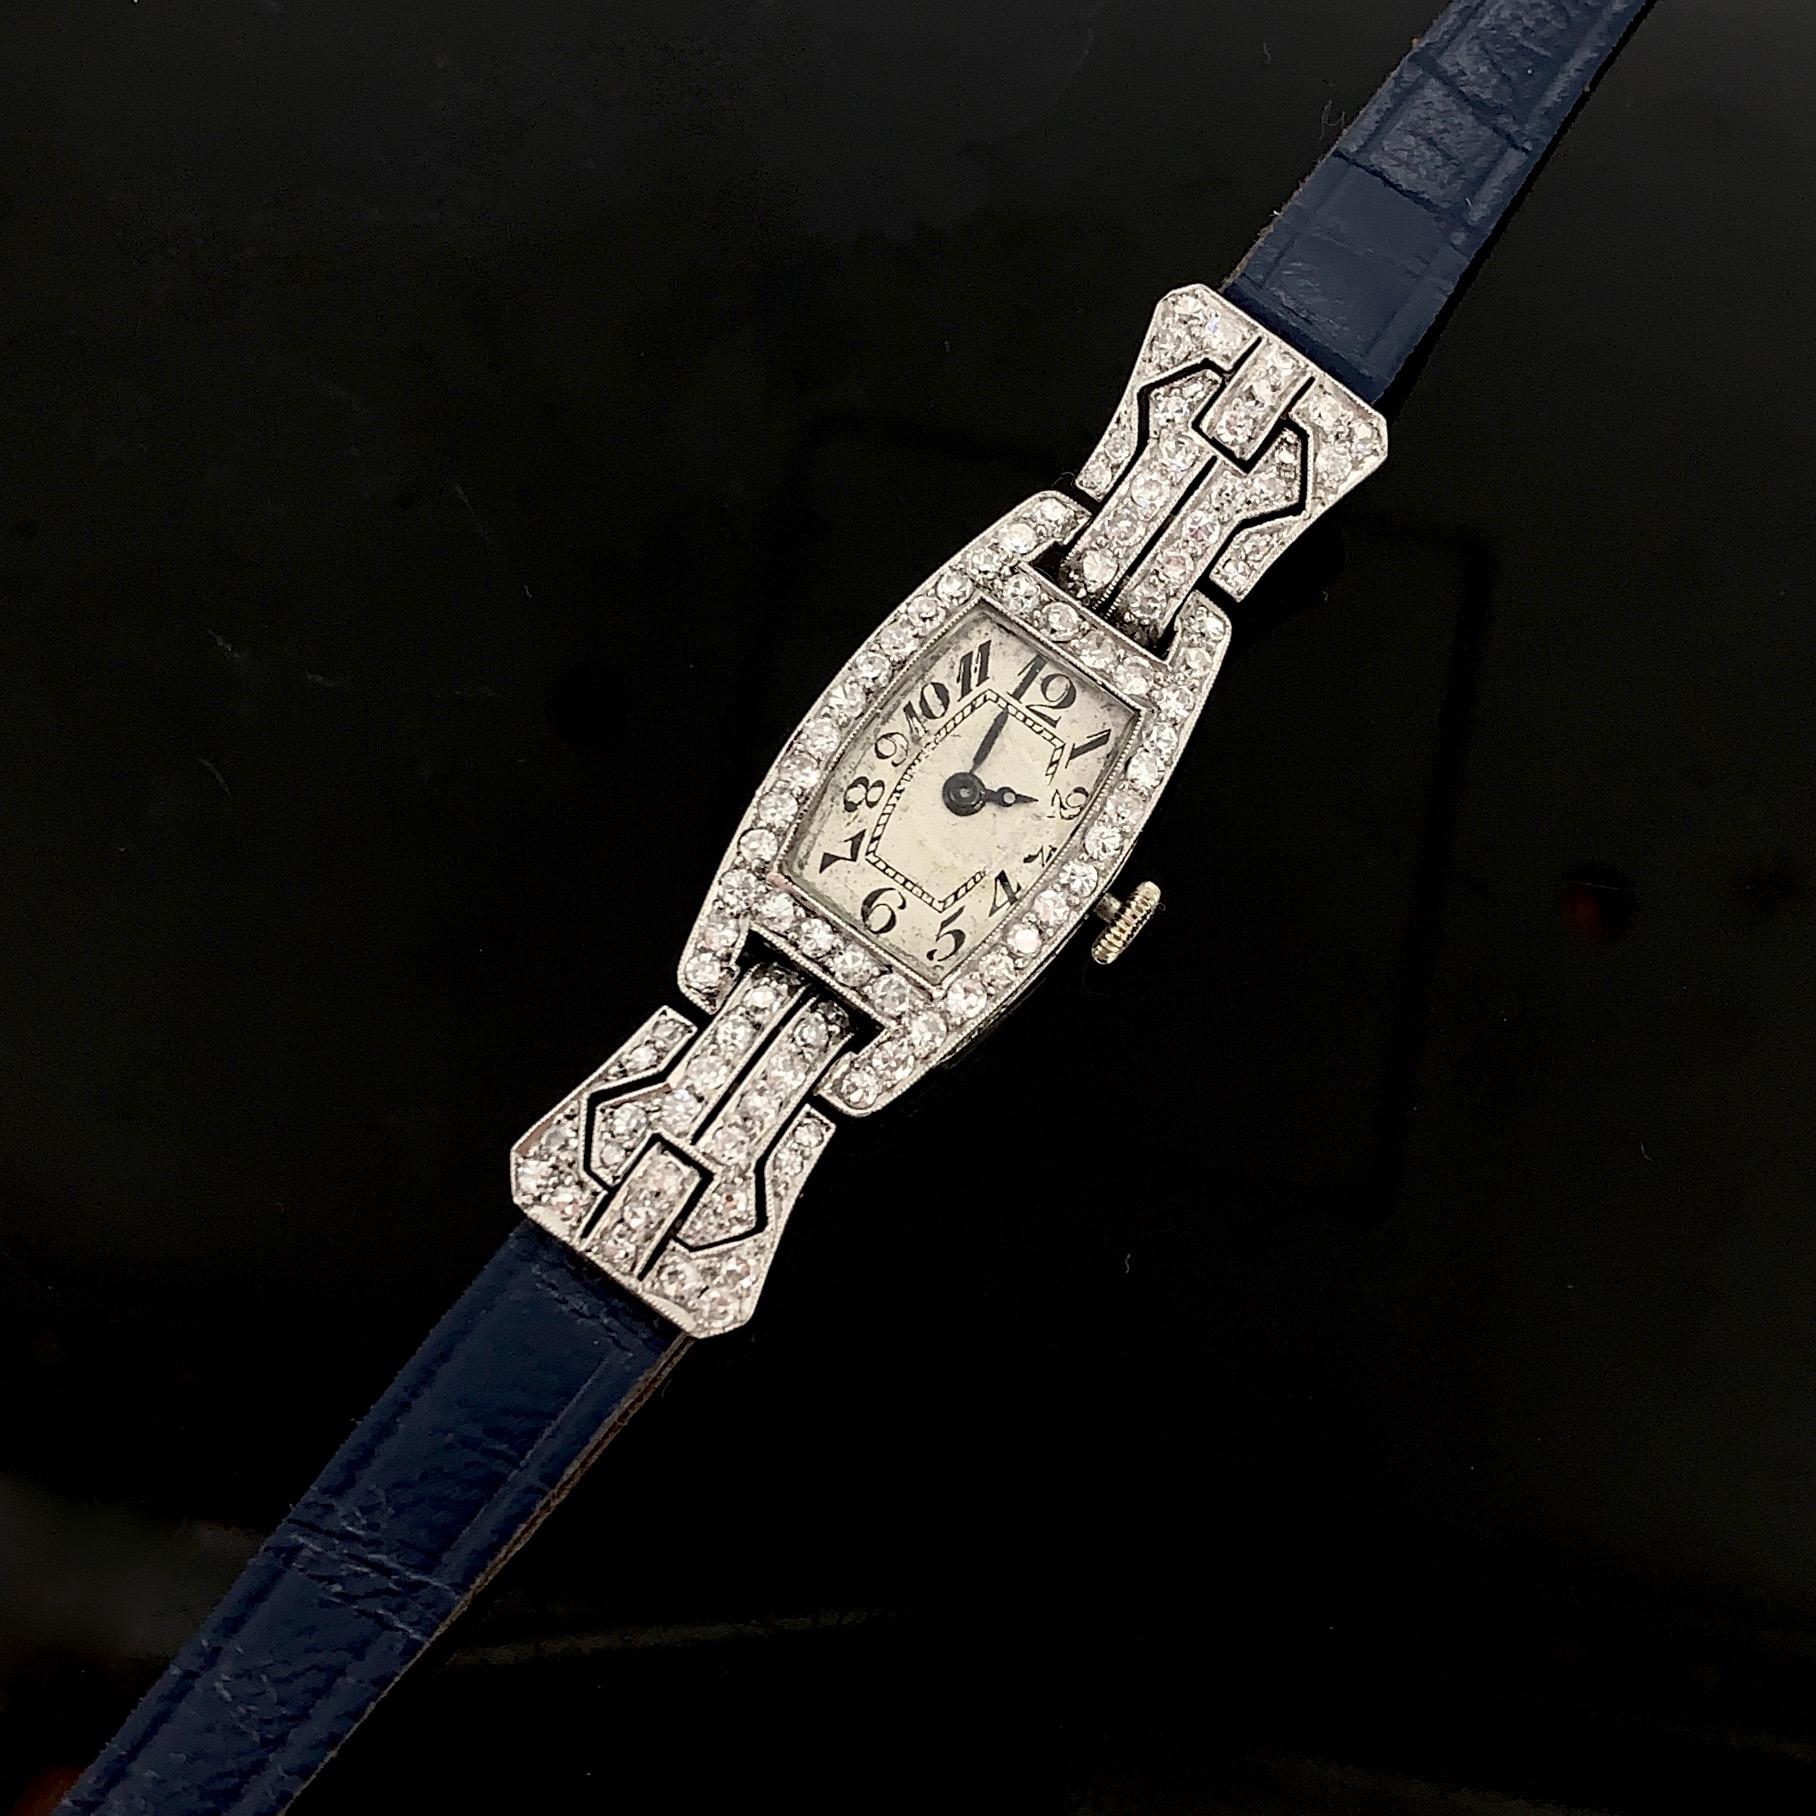 This timeless wristwatch fully made in platinum and it comes directly from the Art Deco era. It is adorned with single cut diamonds with a total carat weight of 1.40ct approximately. The watch is an automatic one and works perfectly. It was also